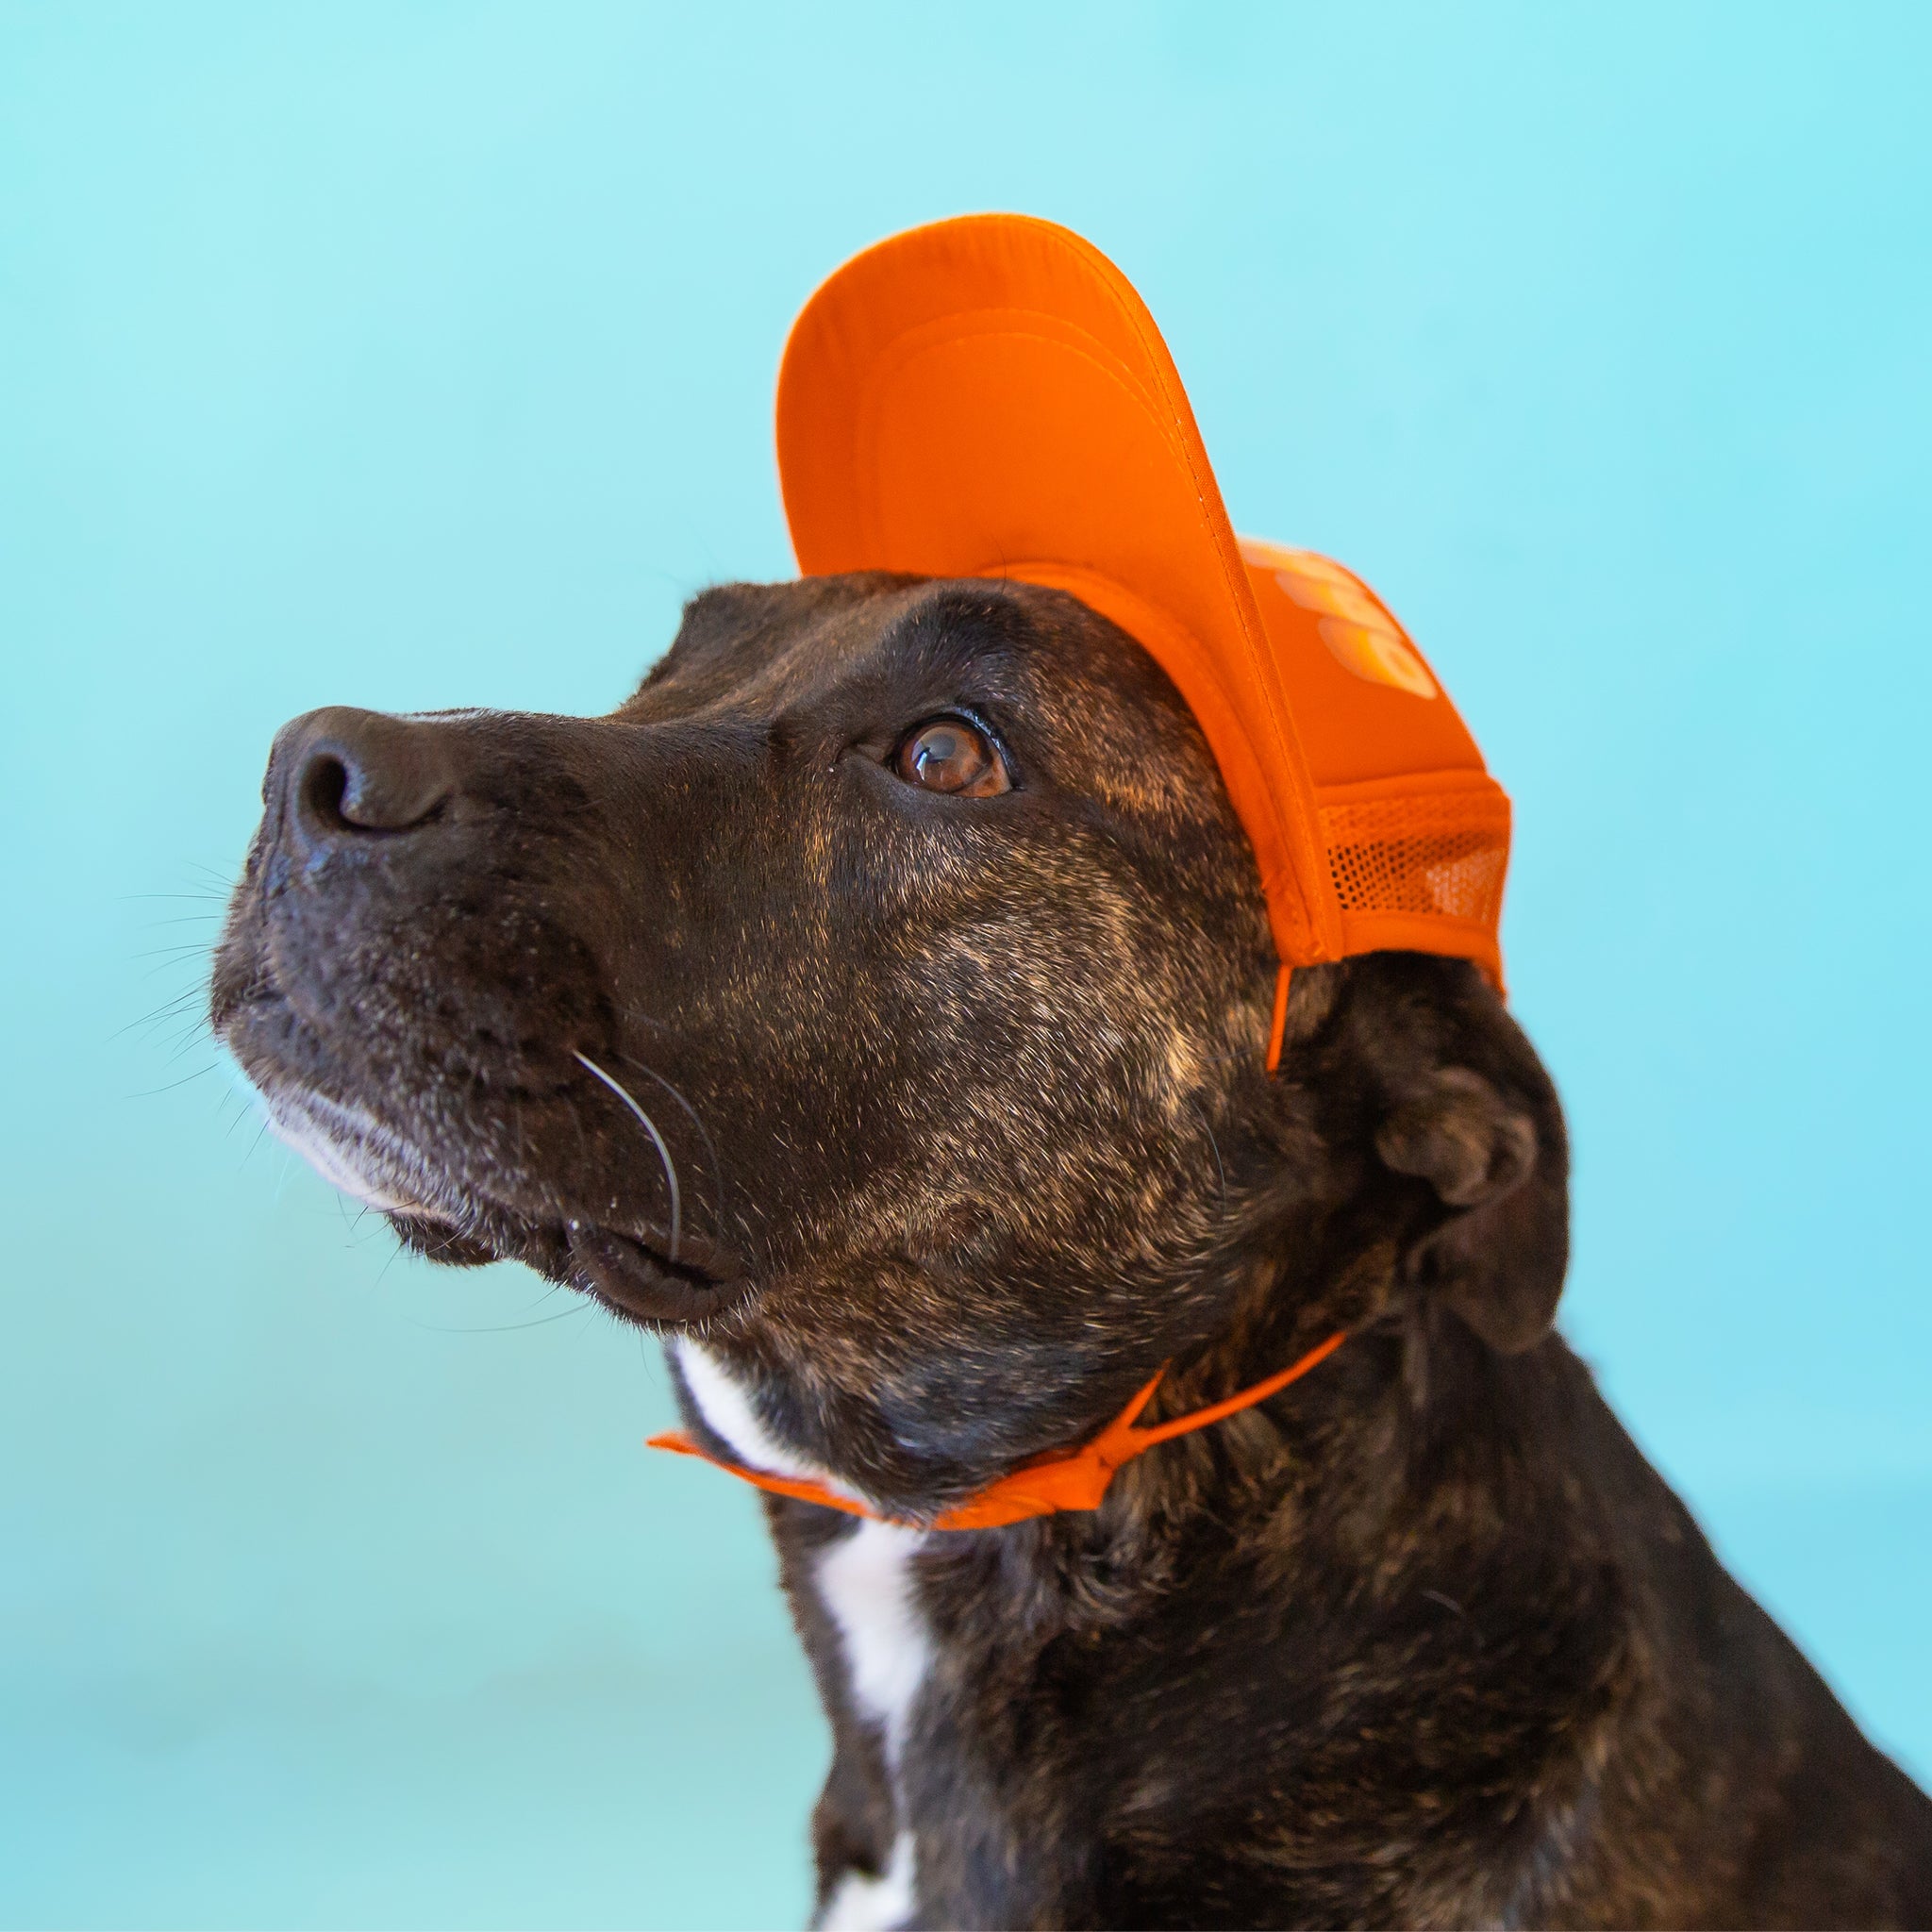 An orange puplid hat with text along the front that reads, "San Diego" and a neck strap.